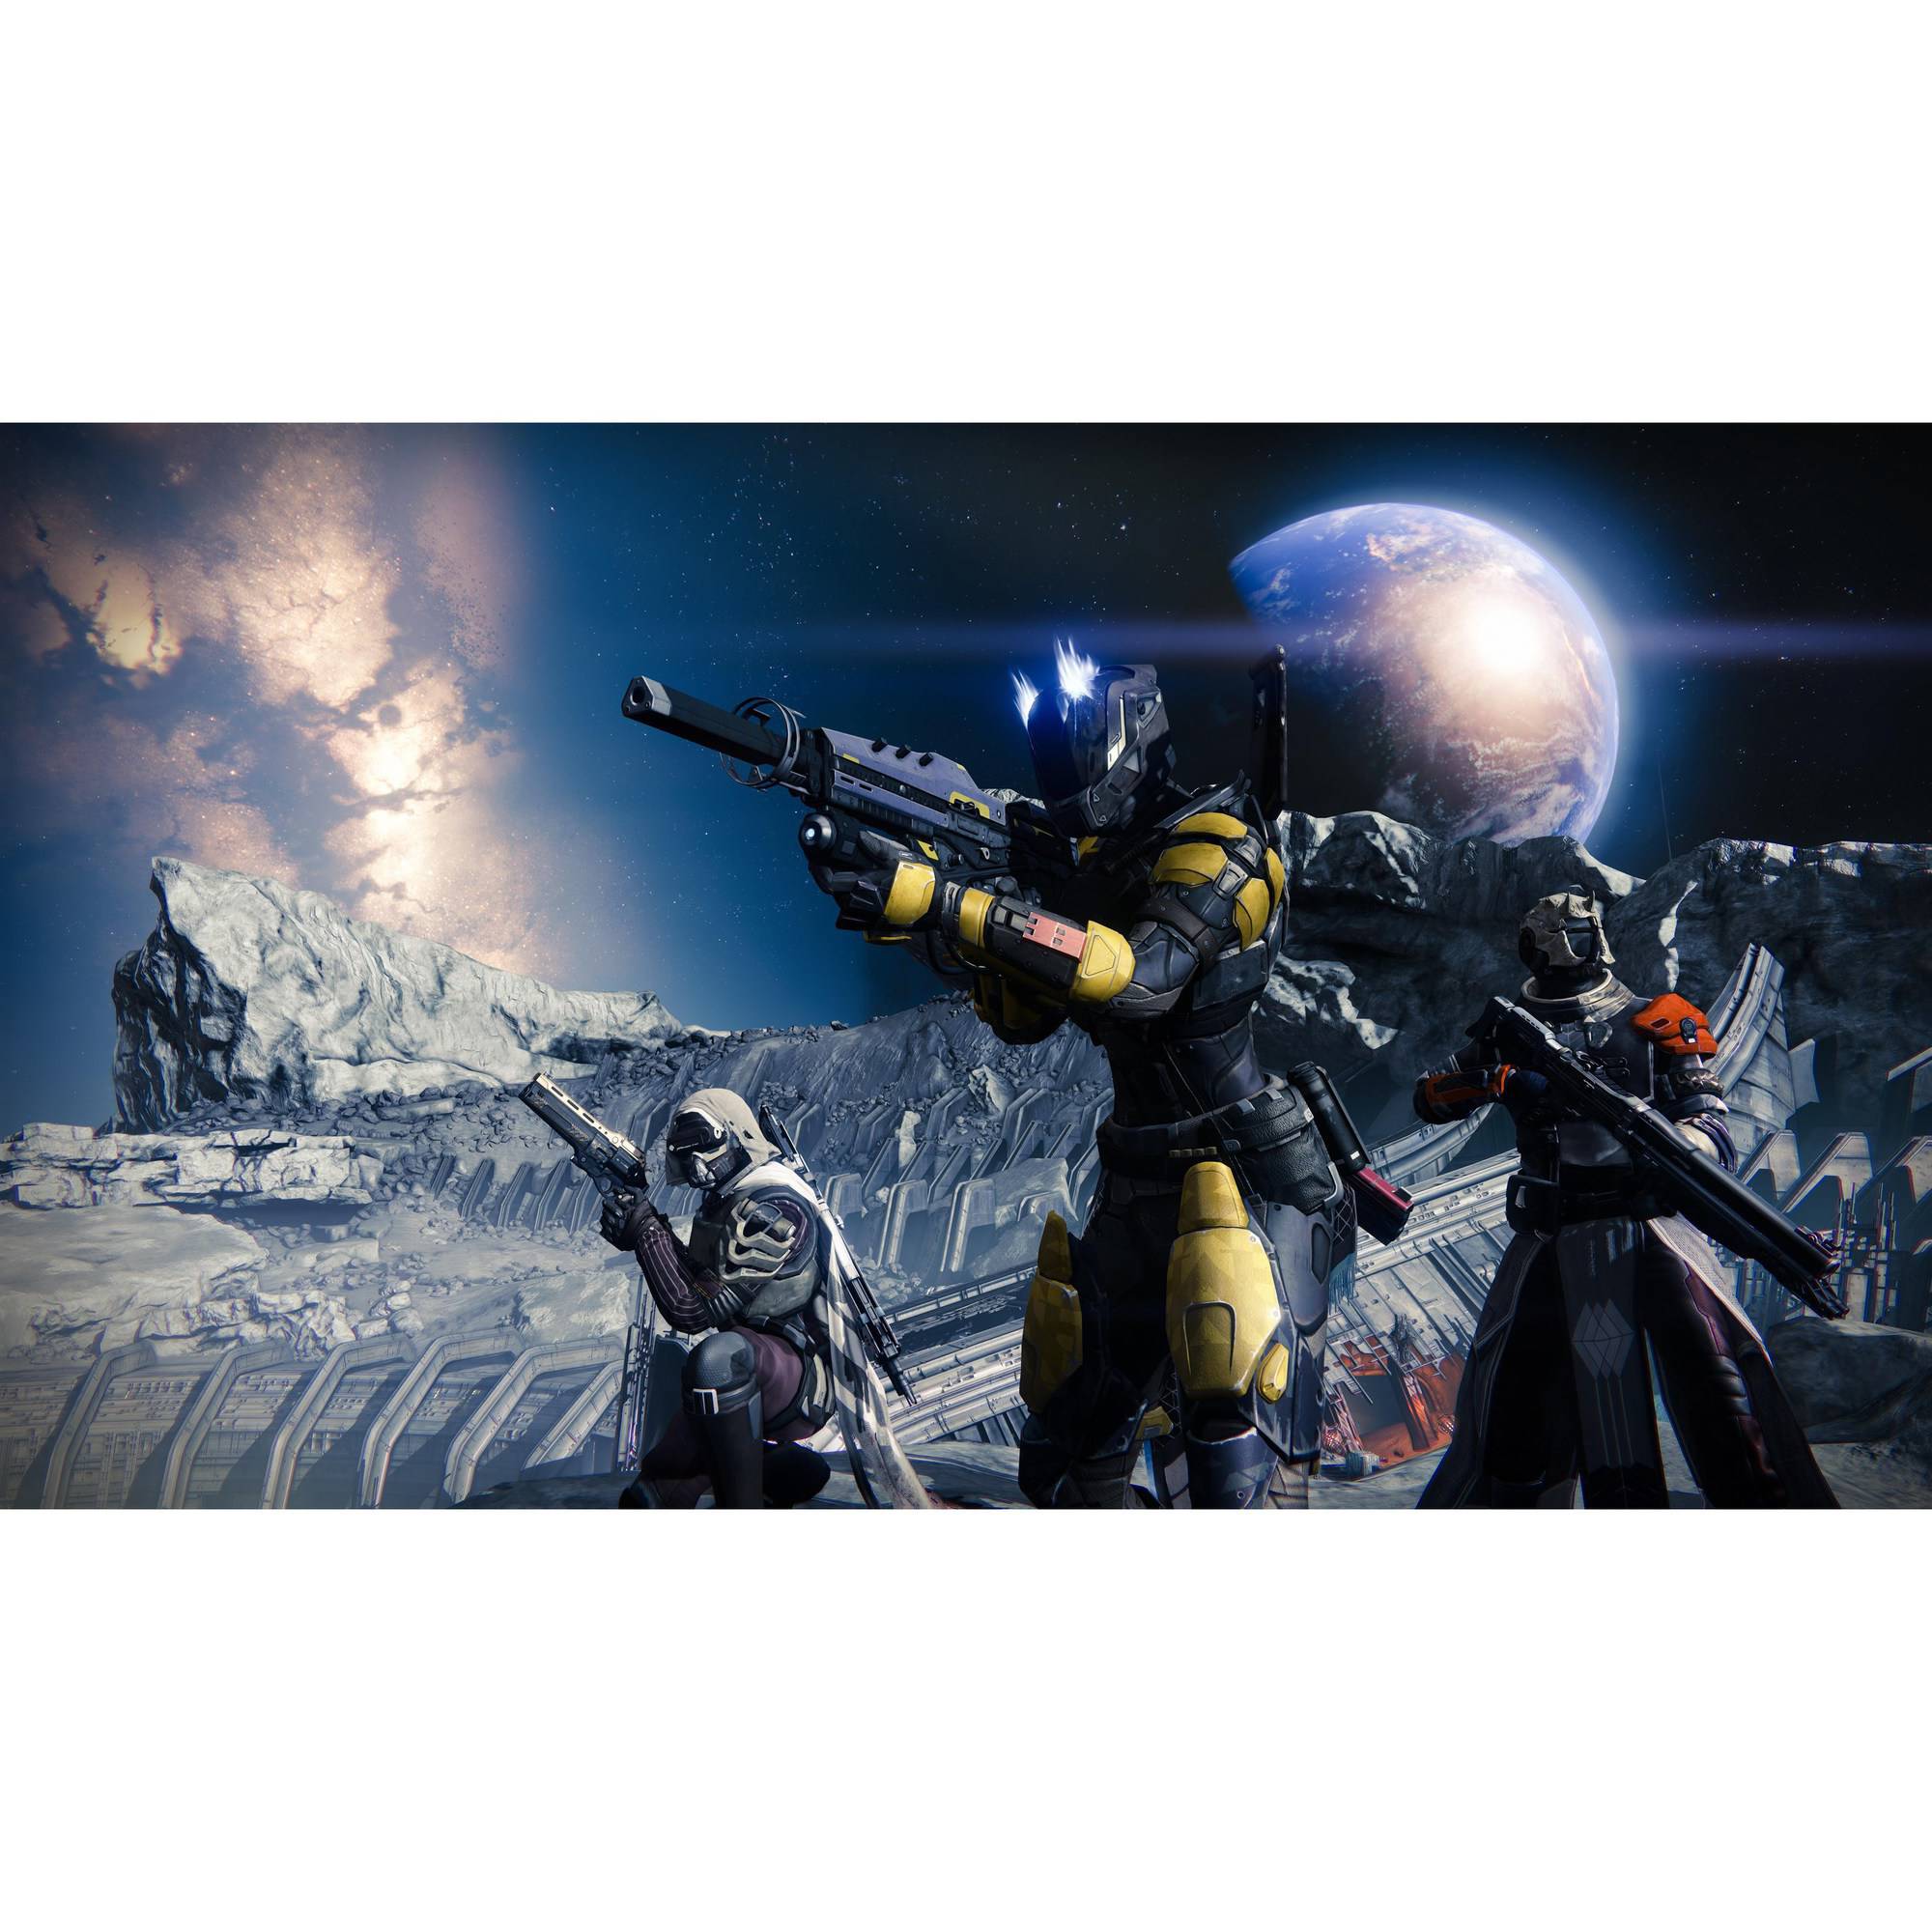 Destiny: The Taken King Legendary Edition, Activision, PlayStation 4, 047875874428 - image 25 of 31